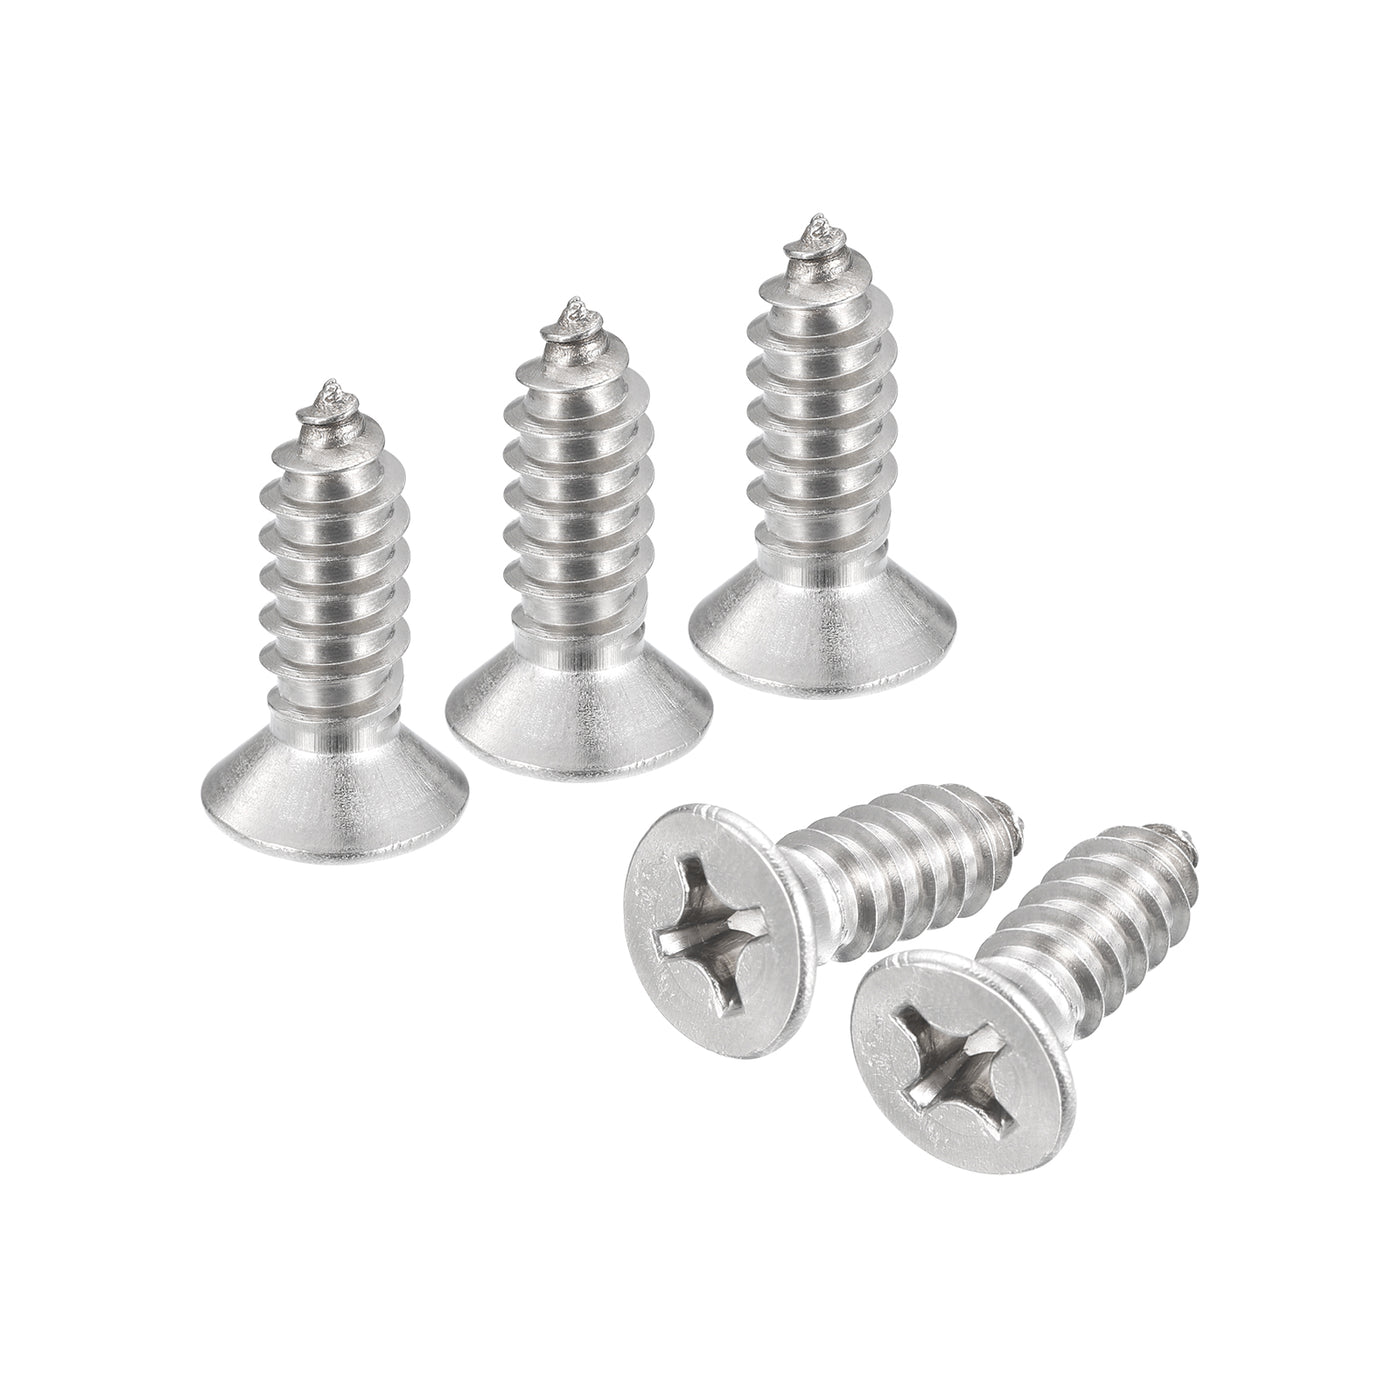 uxcell Uxcell #14x3/4" Wood Screws, 30pcs Phillips Self Tapping Screws 304 Stainless Steel